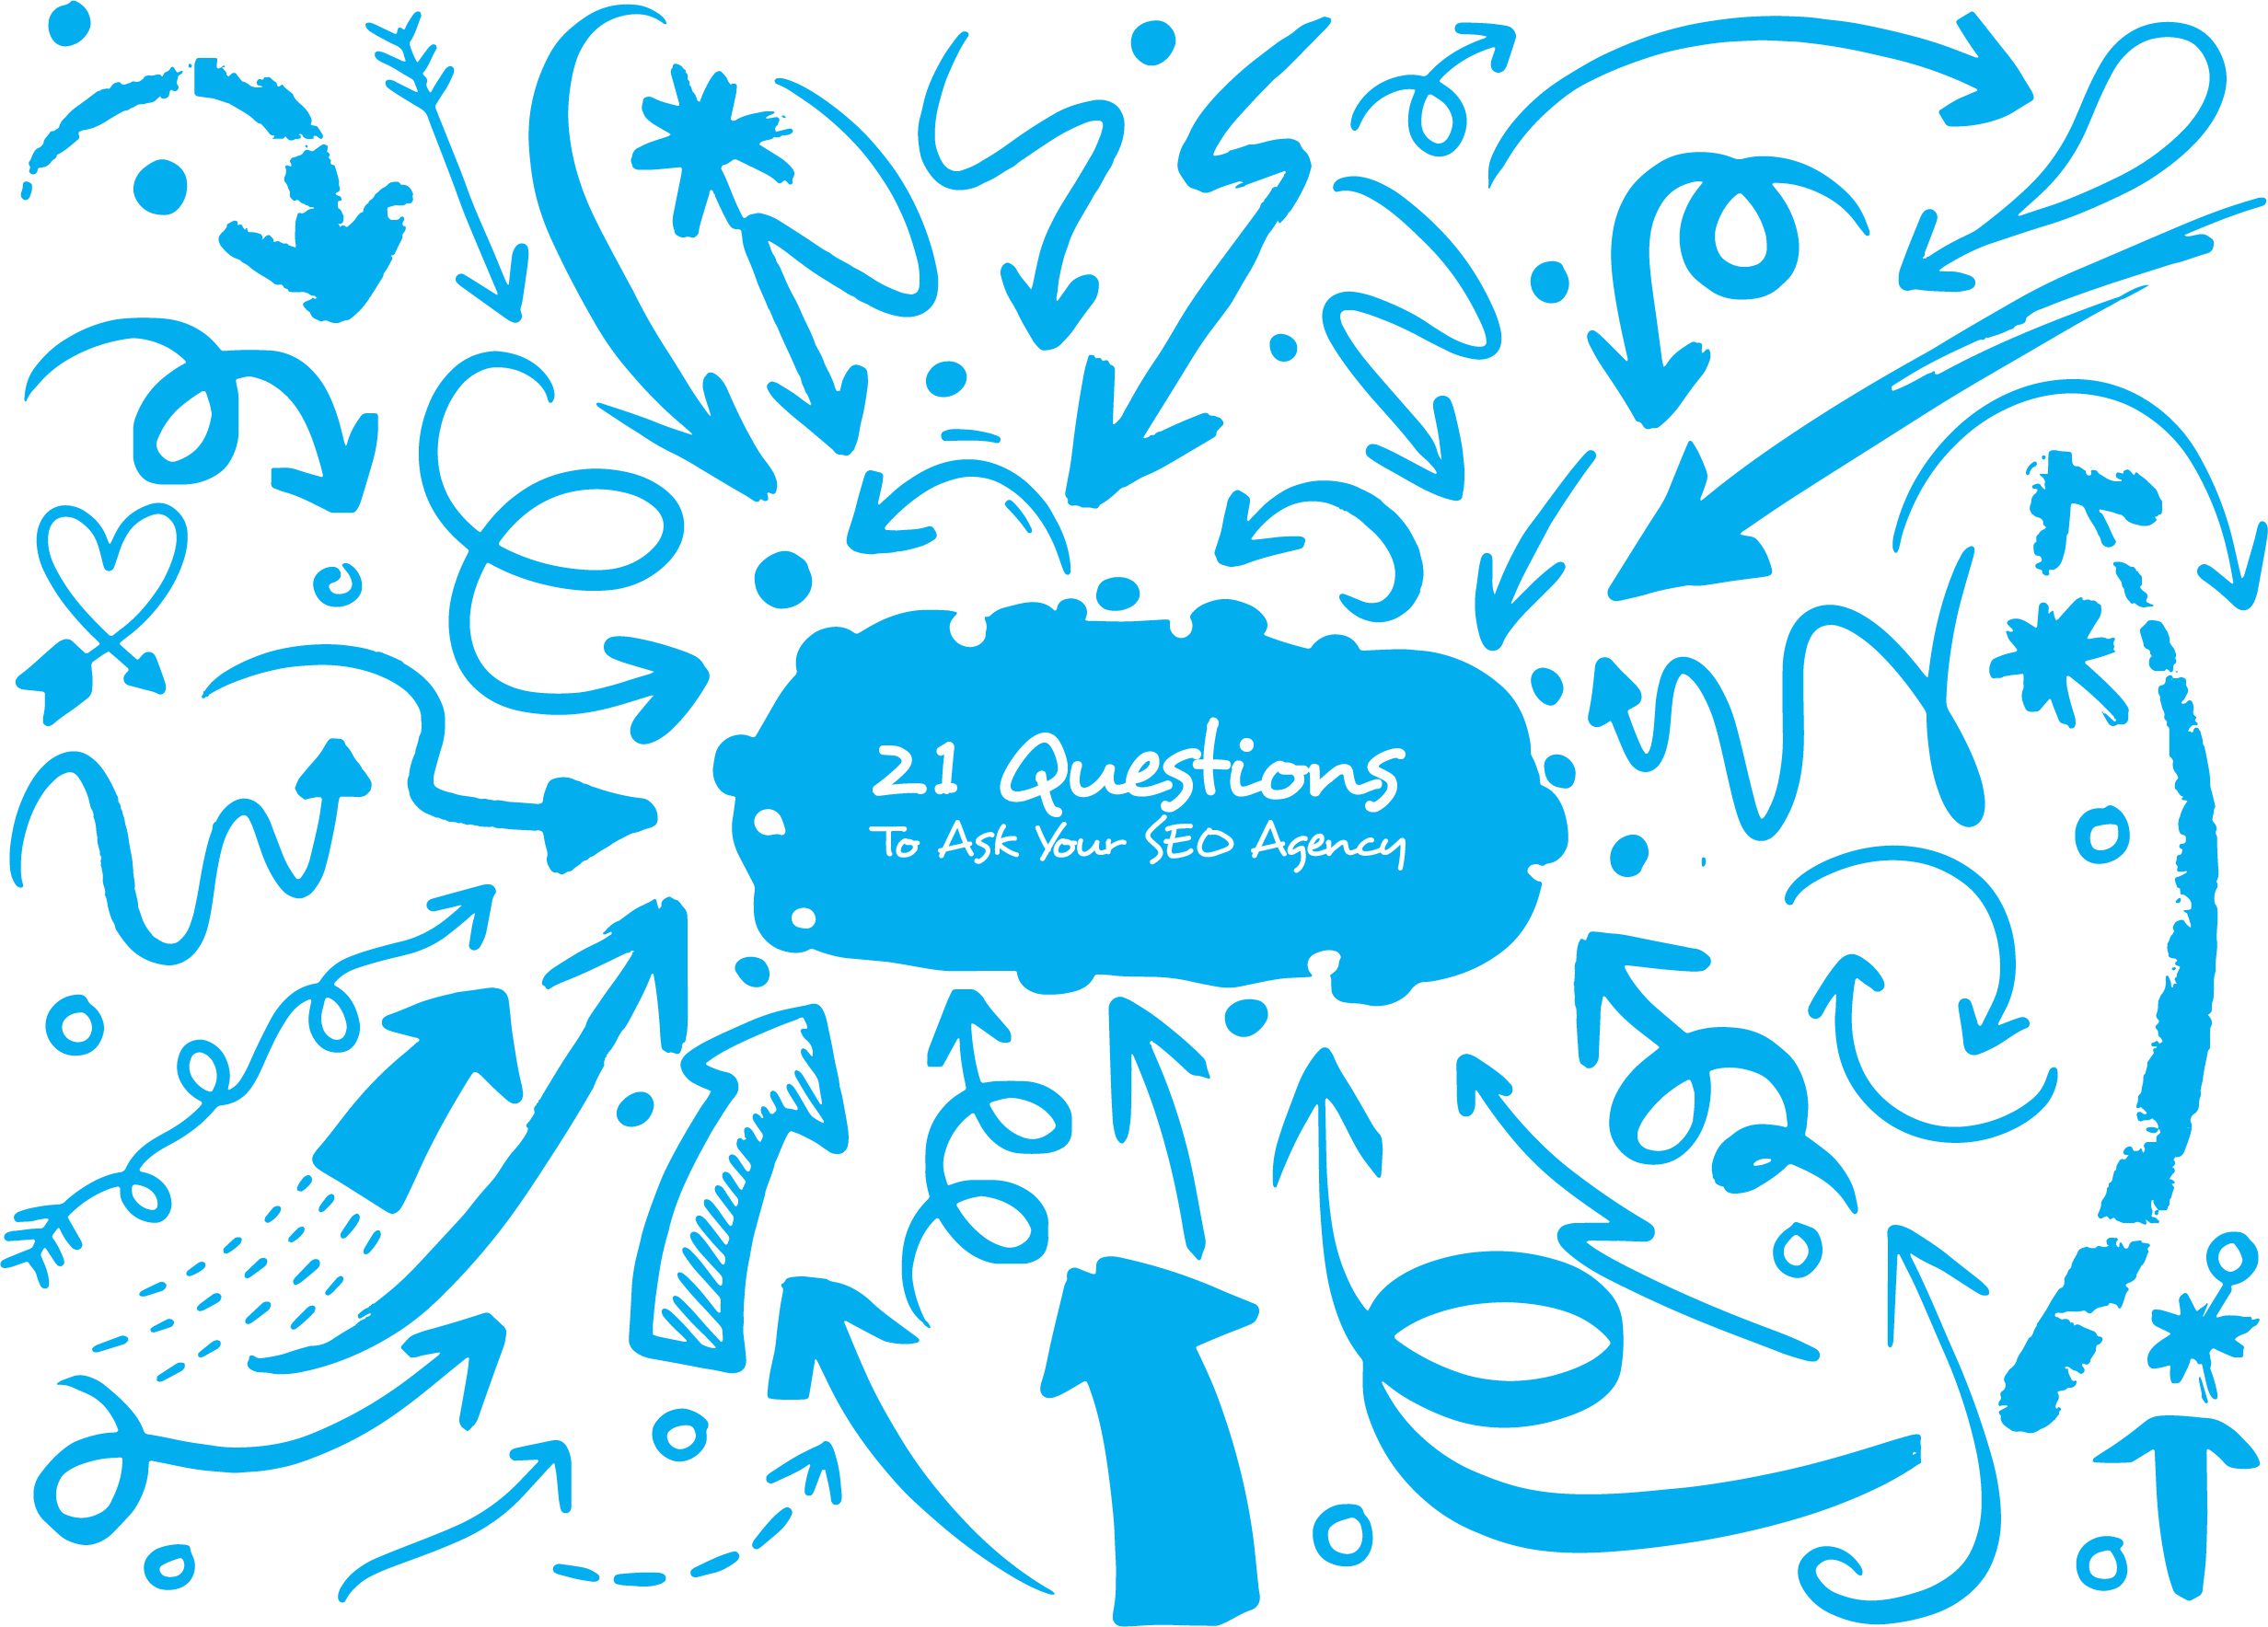 21 Questions To Ask Your SEO Agency